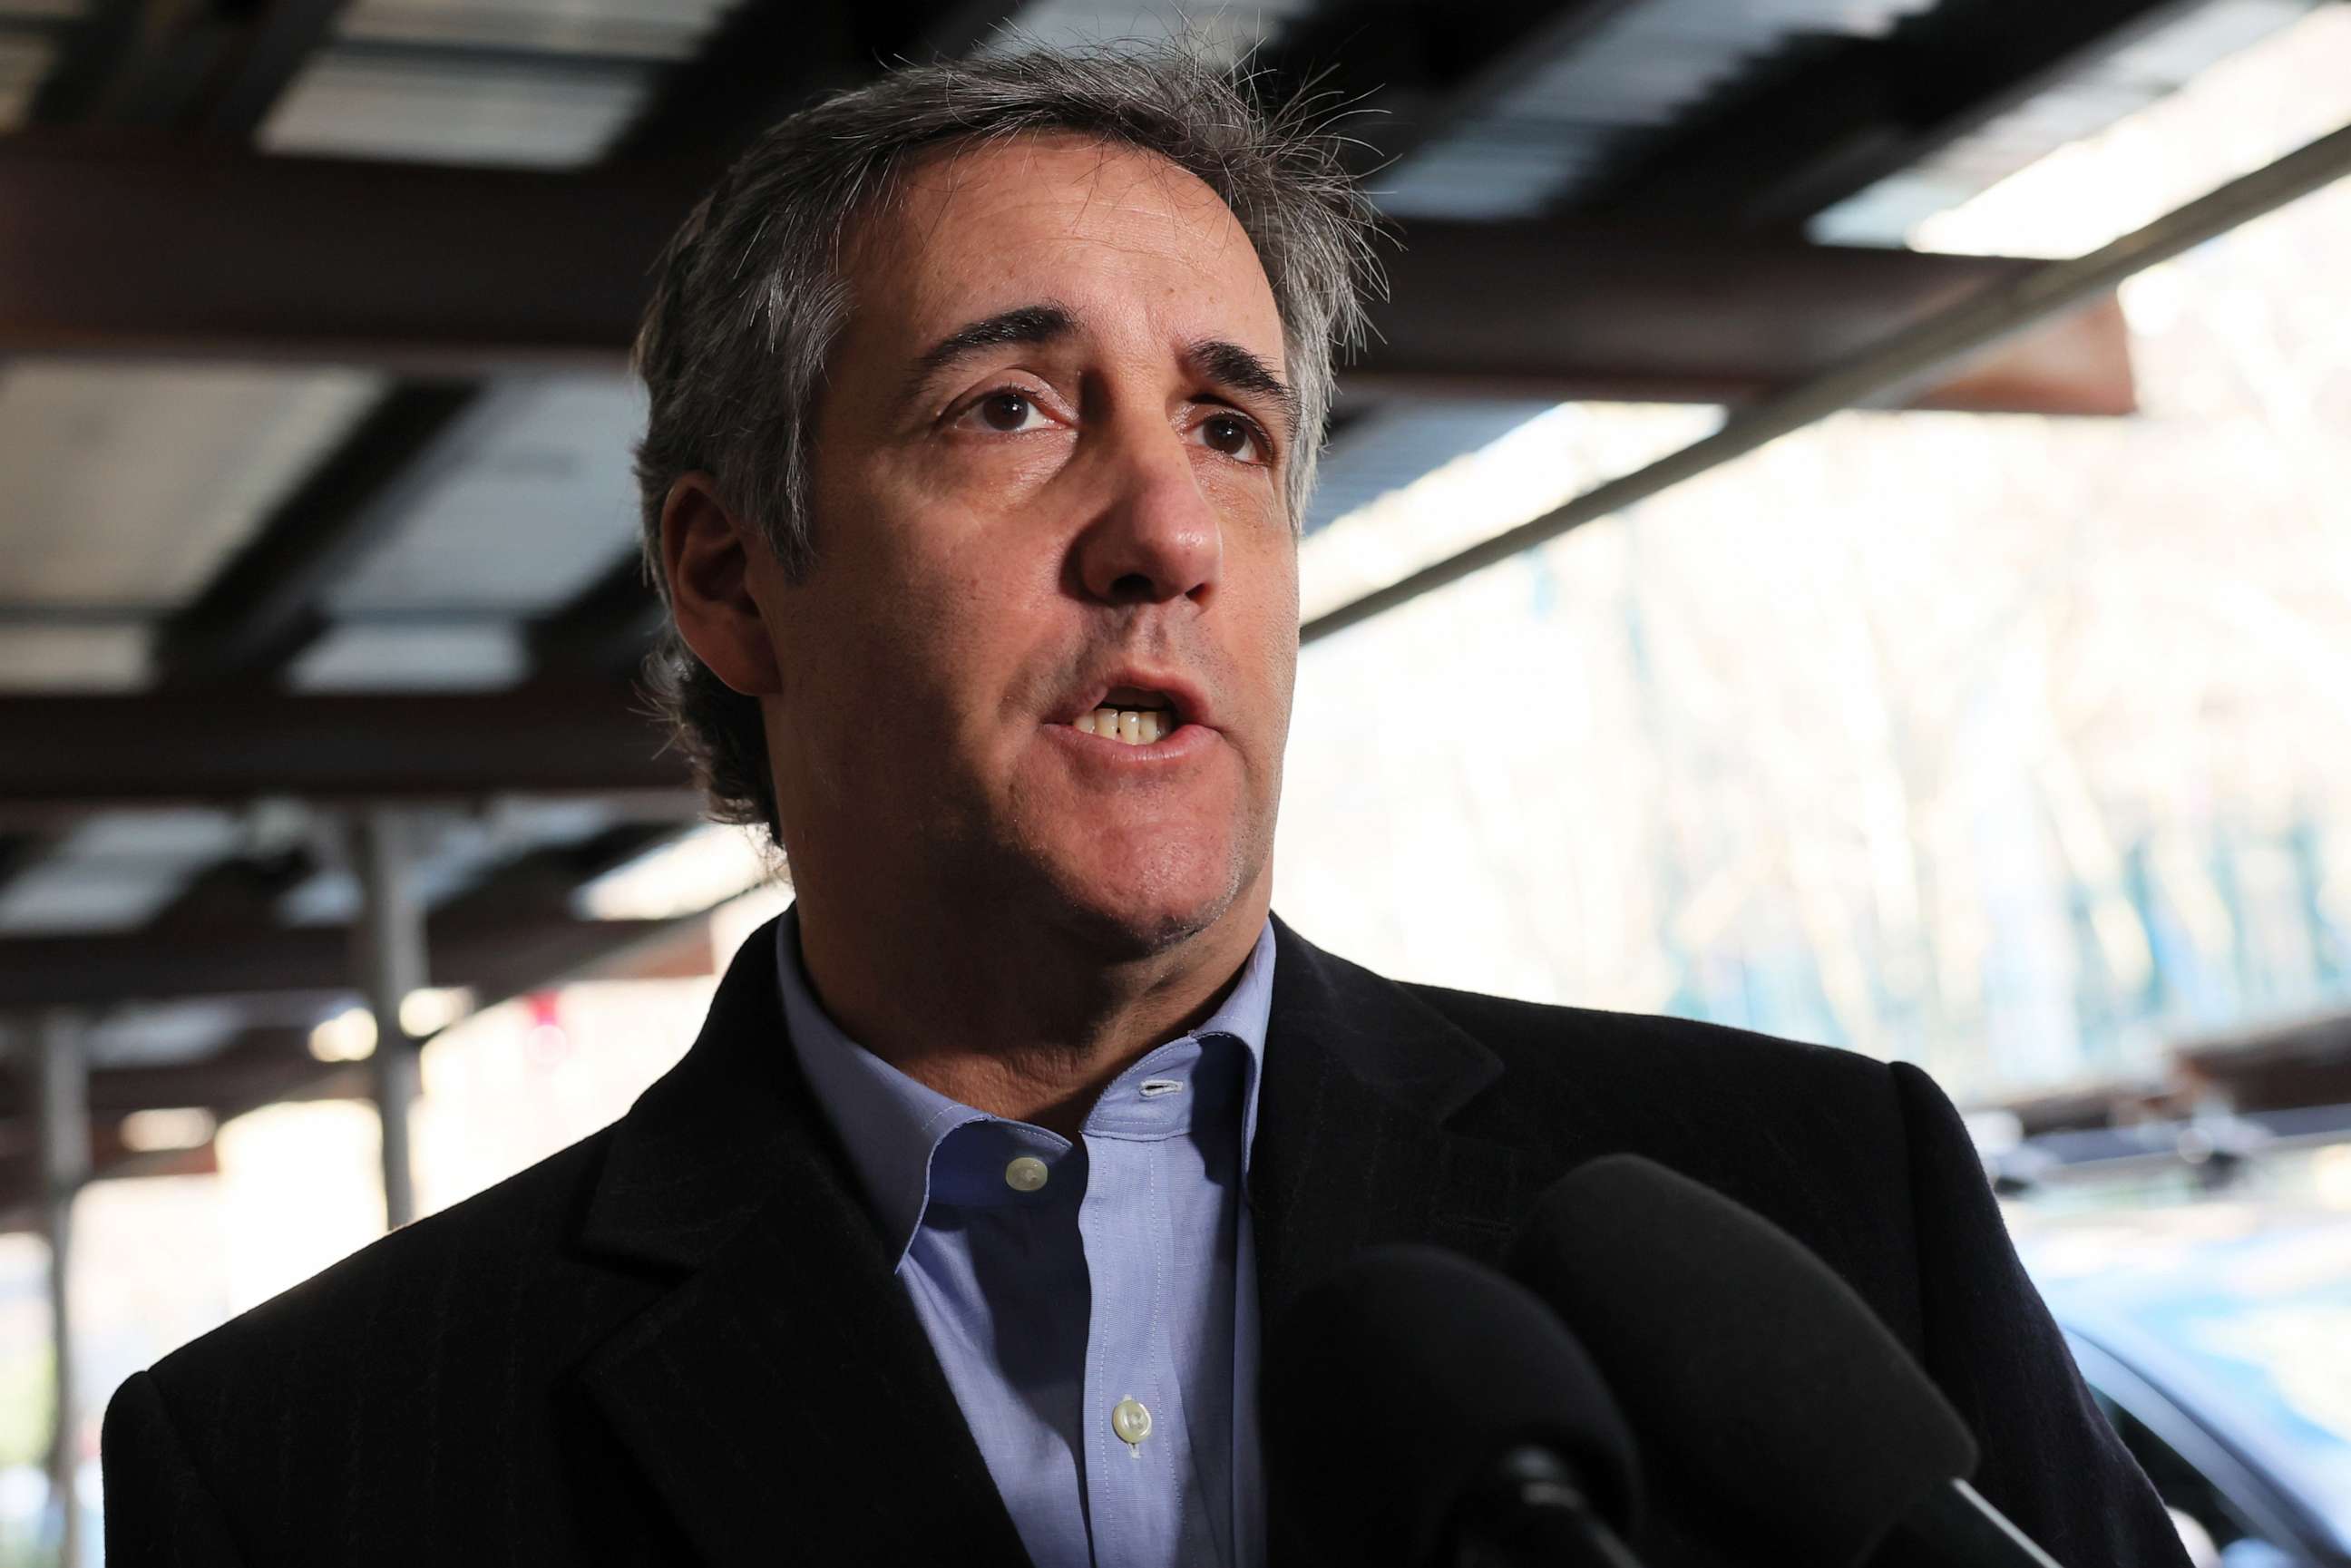 PHOTO: Former Trump Attorney Michael Cohen gives a short statement to members of the press as he arrives to meet with the Manhattan District Attorney on February 8, 2023 in New York City.